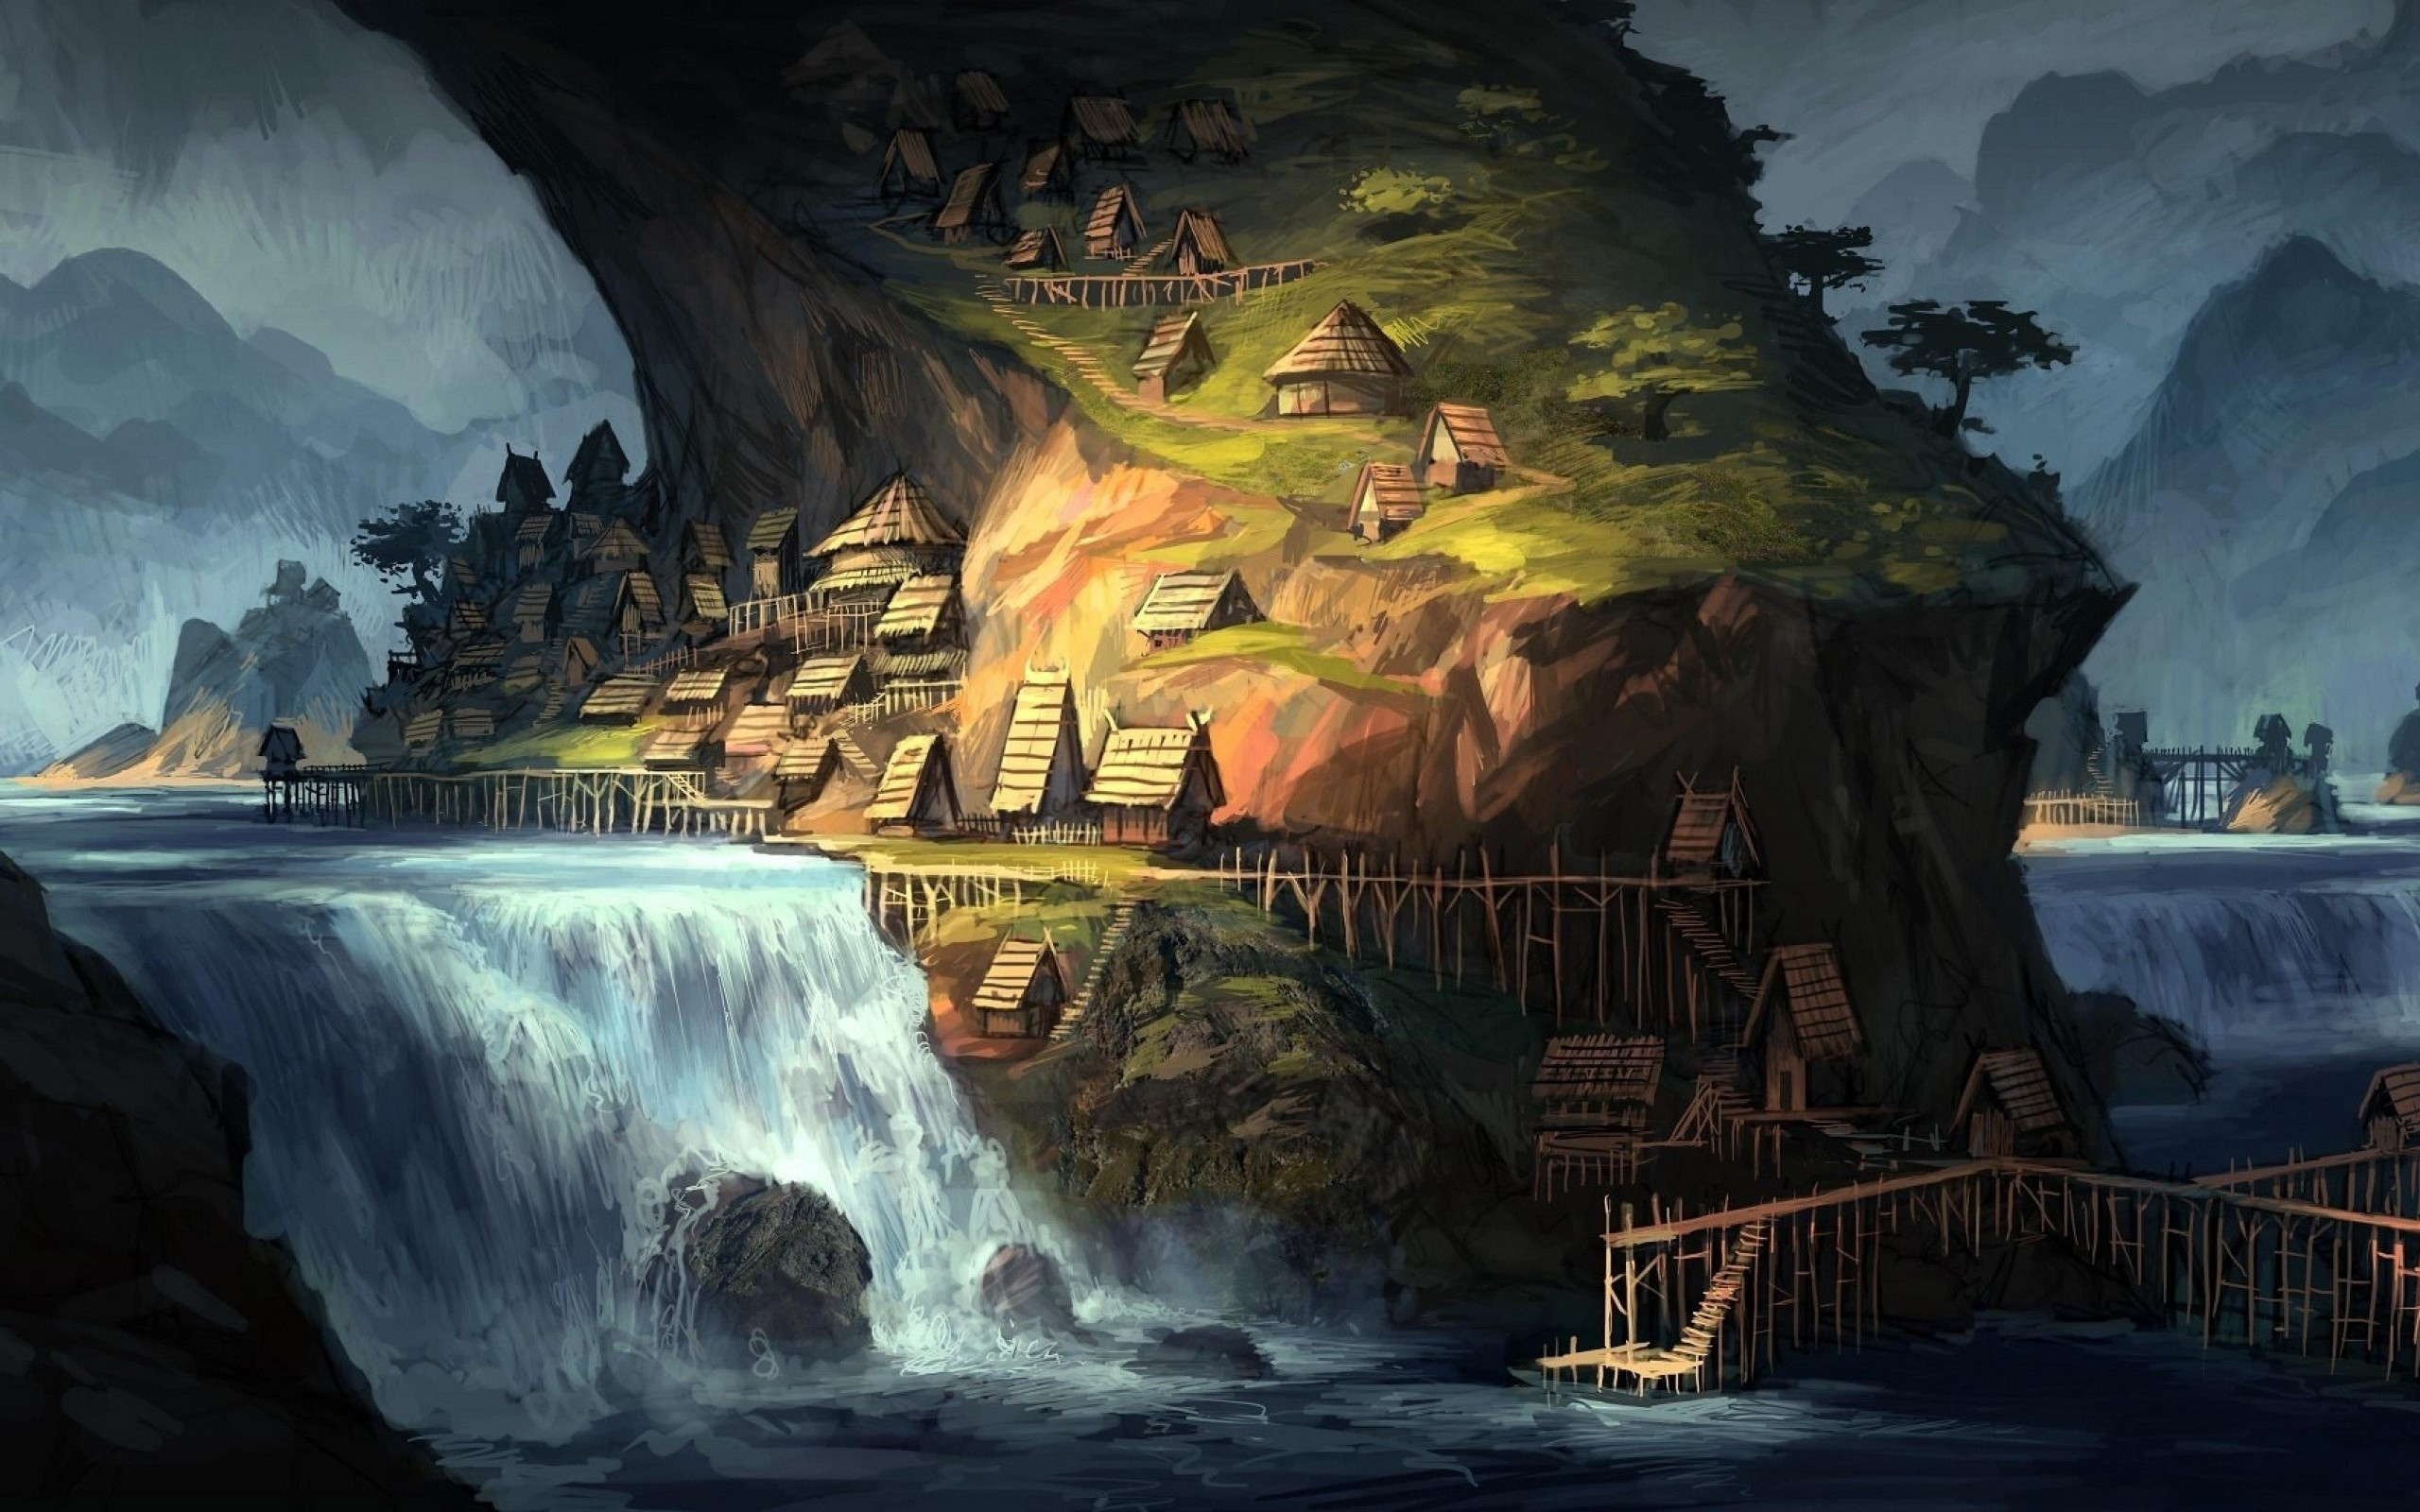 Download 2560x1600 Fantasy Village, Tiny Houses, Mountain, Waterfall, Cliff, Scenery Wallpaper for MacBook Pro 13 inch